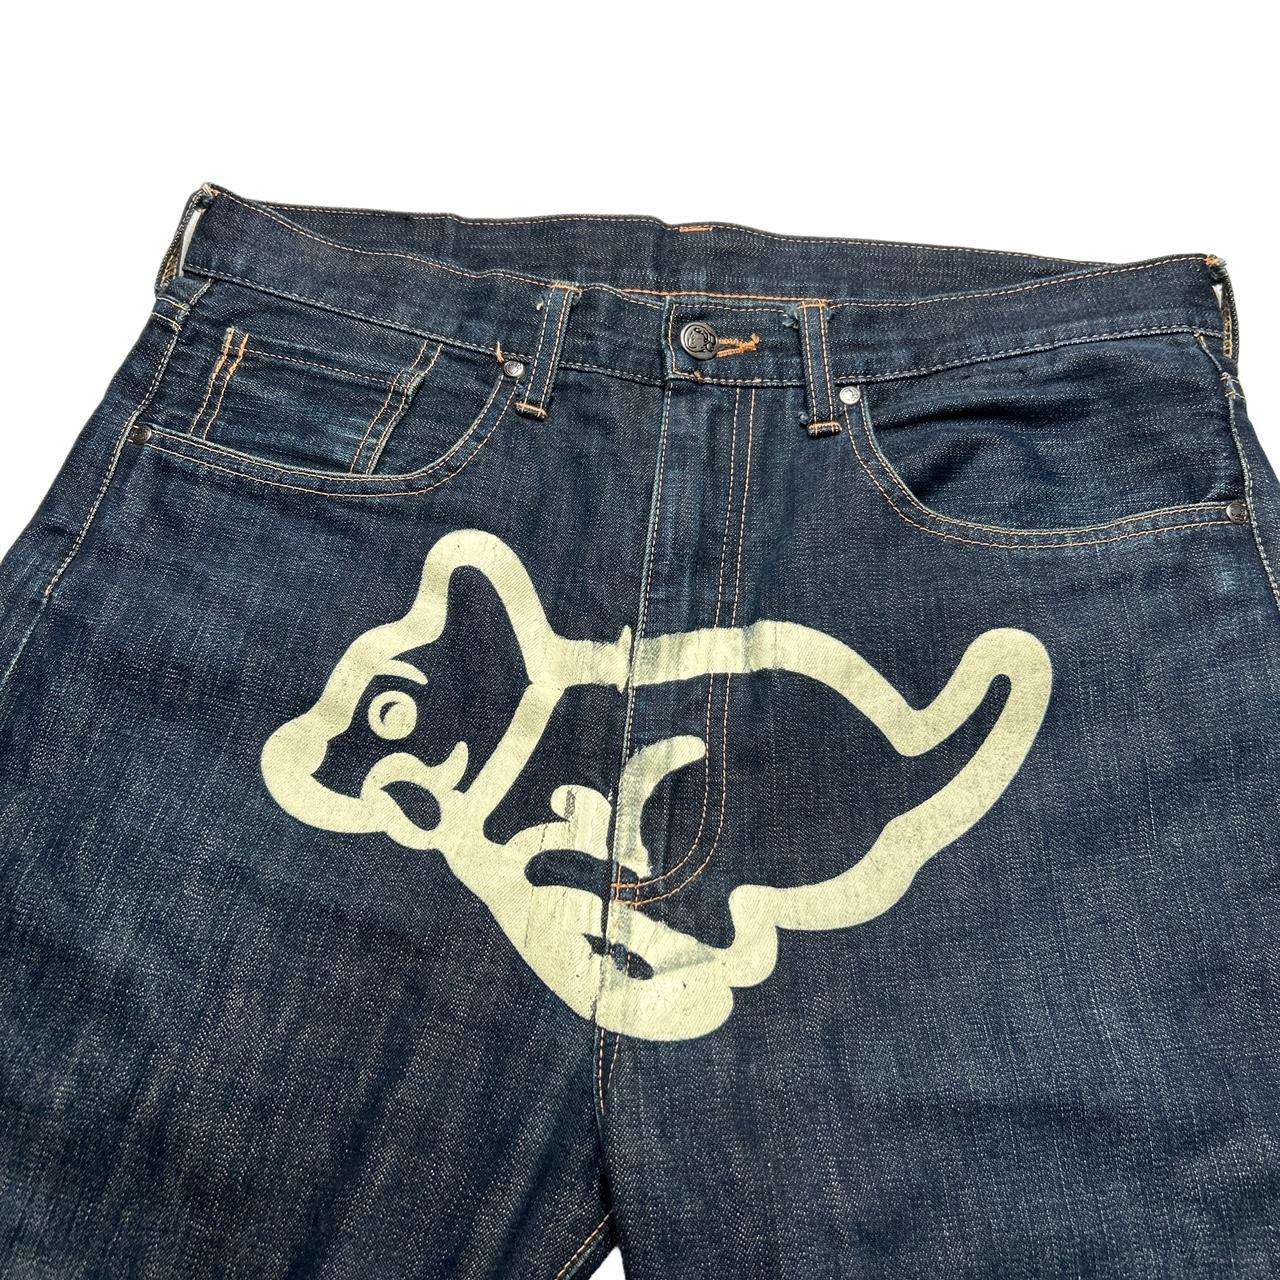 Running Pup Jeans (32")